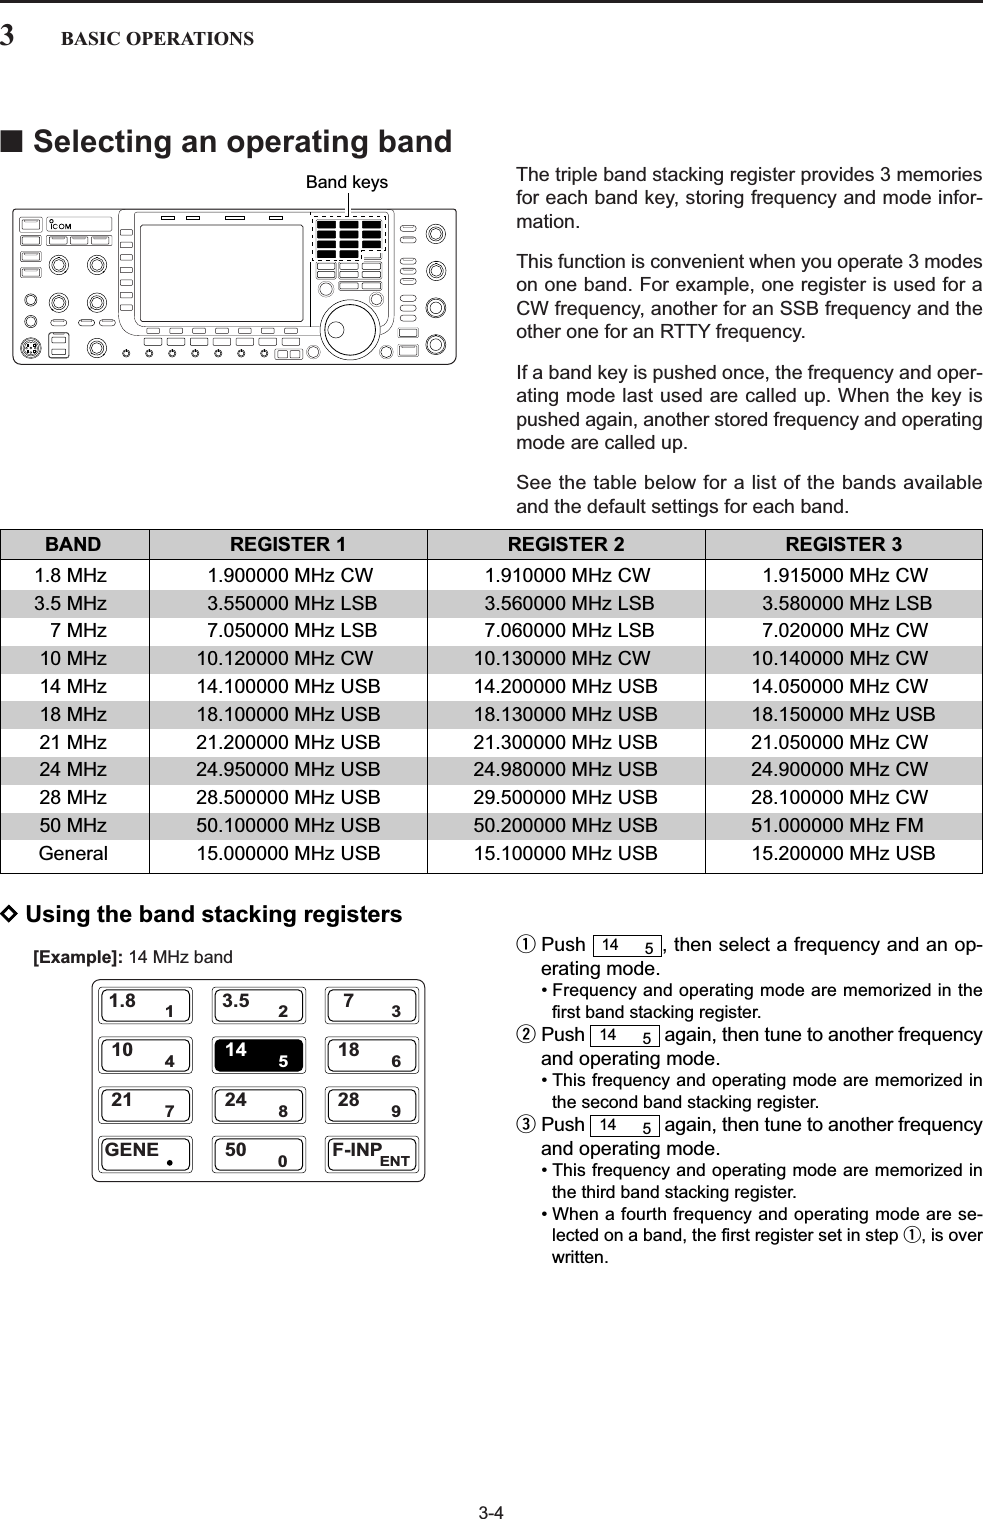 3-4■Selecting an operating bandThe triple band stacking register provides 3 memoriesfor each band key, storing frequency and mode infor-mation.This function is convenient when you operate 3 modeson one band. For example, one register is used for aCW frequency, another for an SSB frequency and theother one for an RTTY frequency.If a band key is pushed once, the frequency and oper-ating mode last used are called up. When the key ispushed again, another stored frequency and operatingmode are called up.See the table below for a list of the bands availableand the default settings for each band.3BASIC OPERATIONSBAND REGISTER 1 REGISTER 2 REGISTER 31.8 MHz 1.900000 MHz CW 1.910000 MHz CW 1.915000 MHz CW3.5 MHz 3.550000 MHz LSB 3.560000 MHz LSB 3.580000 MHz LSB7 MHz 7.050000 MHz LSB 7.060000 MHz LSB 7.020000 MHz CW10 MHz 10.120000 MHz CW 10.130000 MHz CW 10.140000 MHz CW14 MHz 14.100000 MHz USB 14.200000 MHz USB 14.050000 MHz CW18 MHz 18.100000 MHz USB 18.130000 MHz USB 18.150000 MHz USB21 MHz 21.200000 MHz USB 21.300000 MHz USB 21.050000 MHz CW24 MHz 24.950000 MHz USB 24.980000 MHz USB 24.900000 MHz CW28 MHz 28.500000 MHz USB 29.500000 MHz USB 28.100000 MHz CW50 MHz 50.100000 MHz USB 50.200000 MHz USB 51.000000 MHz FMGeneral 15.000000 MHz USB 15.100000 MHz USB 15.200000 MHz USBDUsing the band stacking registersqPush  , then select a frequency and an op-erating mode.• Frequency and operating mode are memorized in thefirst band stacking register.wPush  again, then tune to another frequencyand operating mode.• This frequency and operating mode are memorized inthe second band stacking register.ePush  again, then tune to another frequencyand operating mode.• This frequency and operating mode are memorized inthe third band stacking register.• When a fourth frequency and operating mode are se-lected on a band, the first register set in step q, is overwritten.14 514 514 5[Example]: 14 MHz band11.823.537410514618721824928GENE050ENTF-INPBand keys